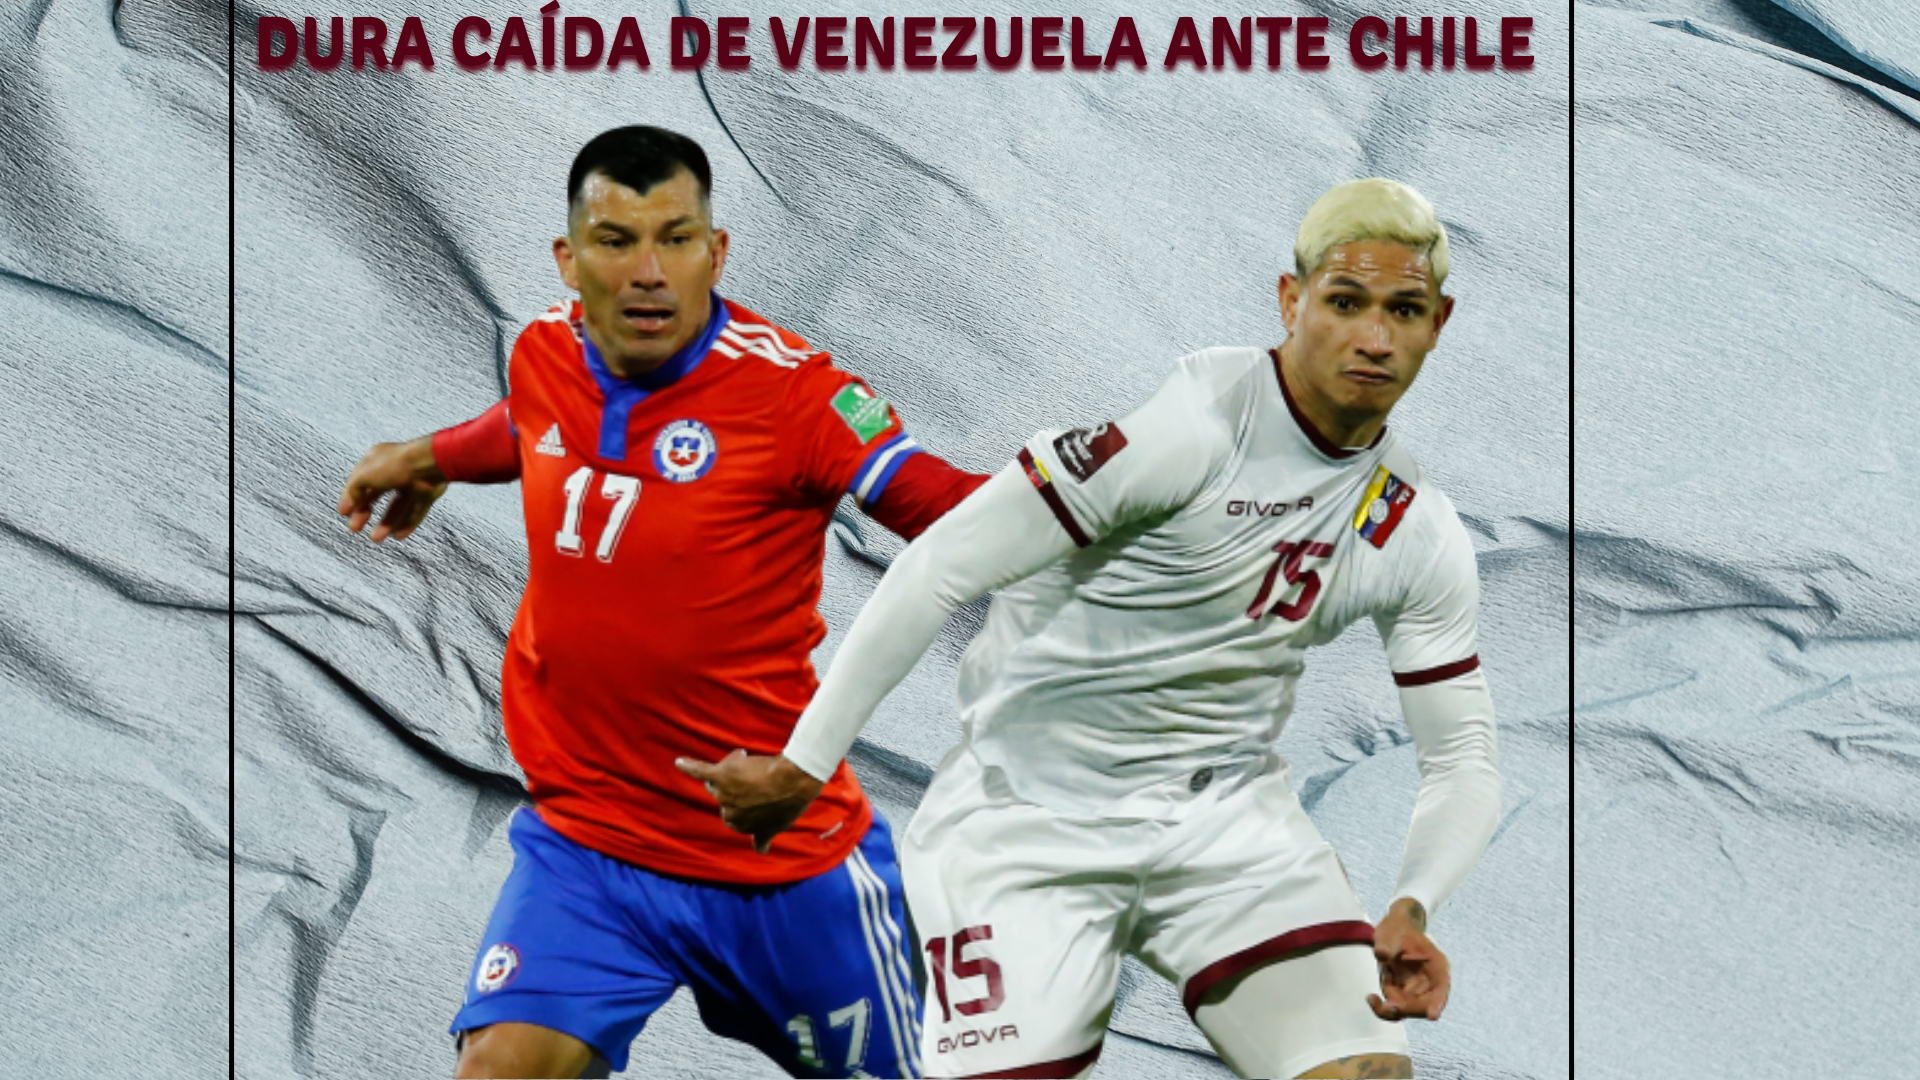 Dura caida ante chile (2).png